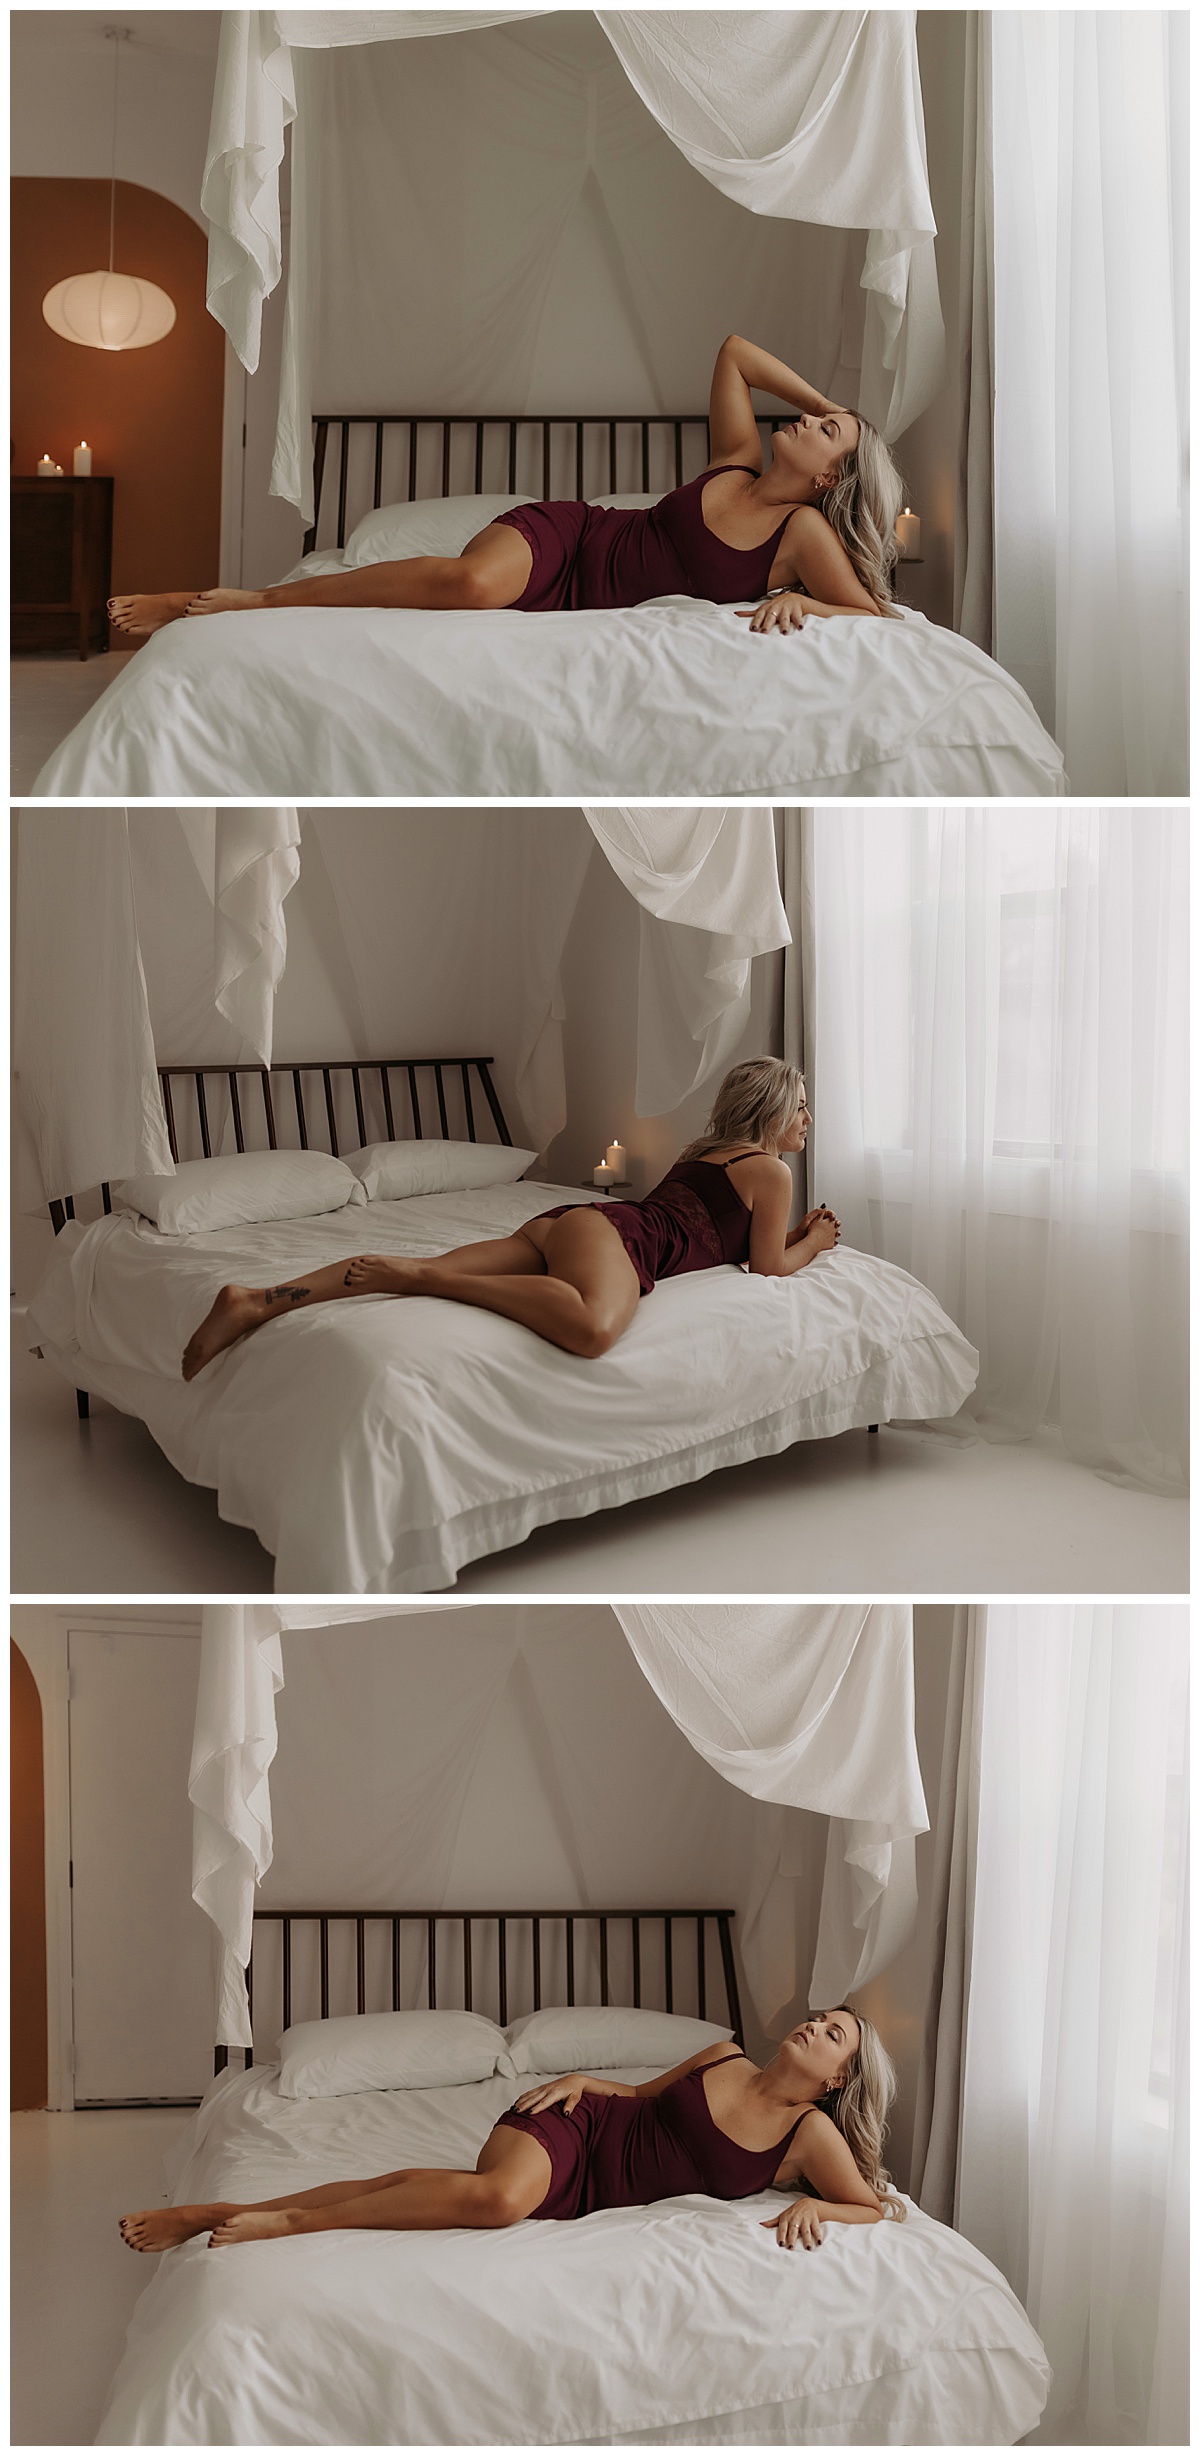 Adult lays on the bed wearing Lingerie Slip Dress